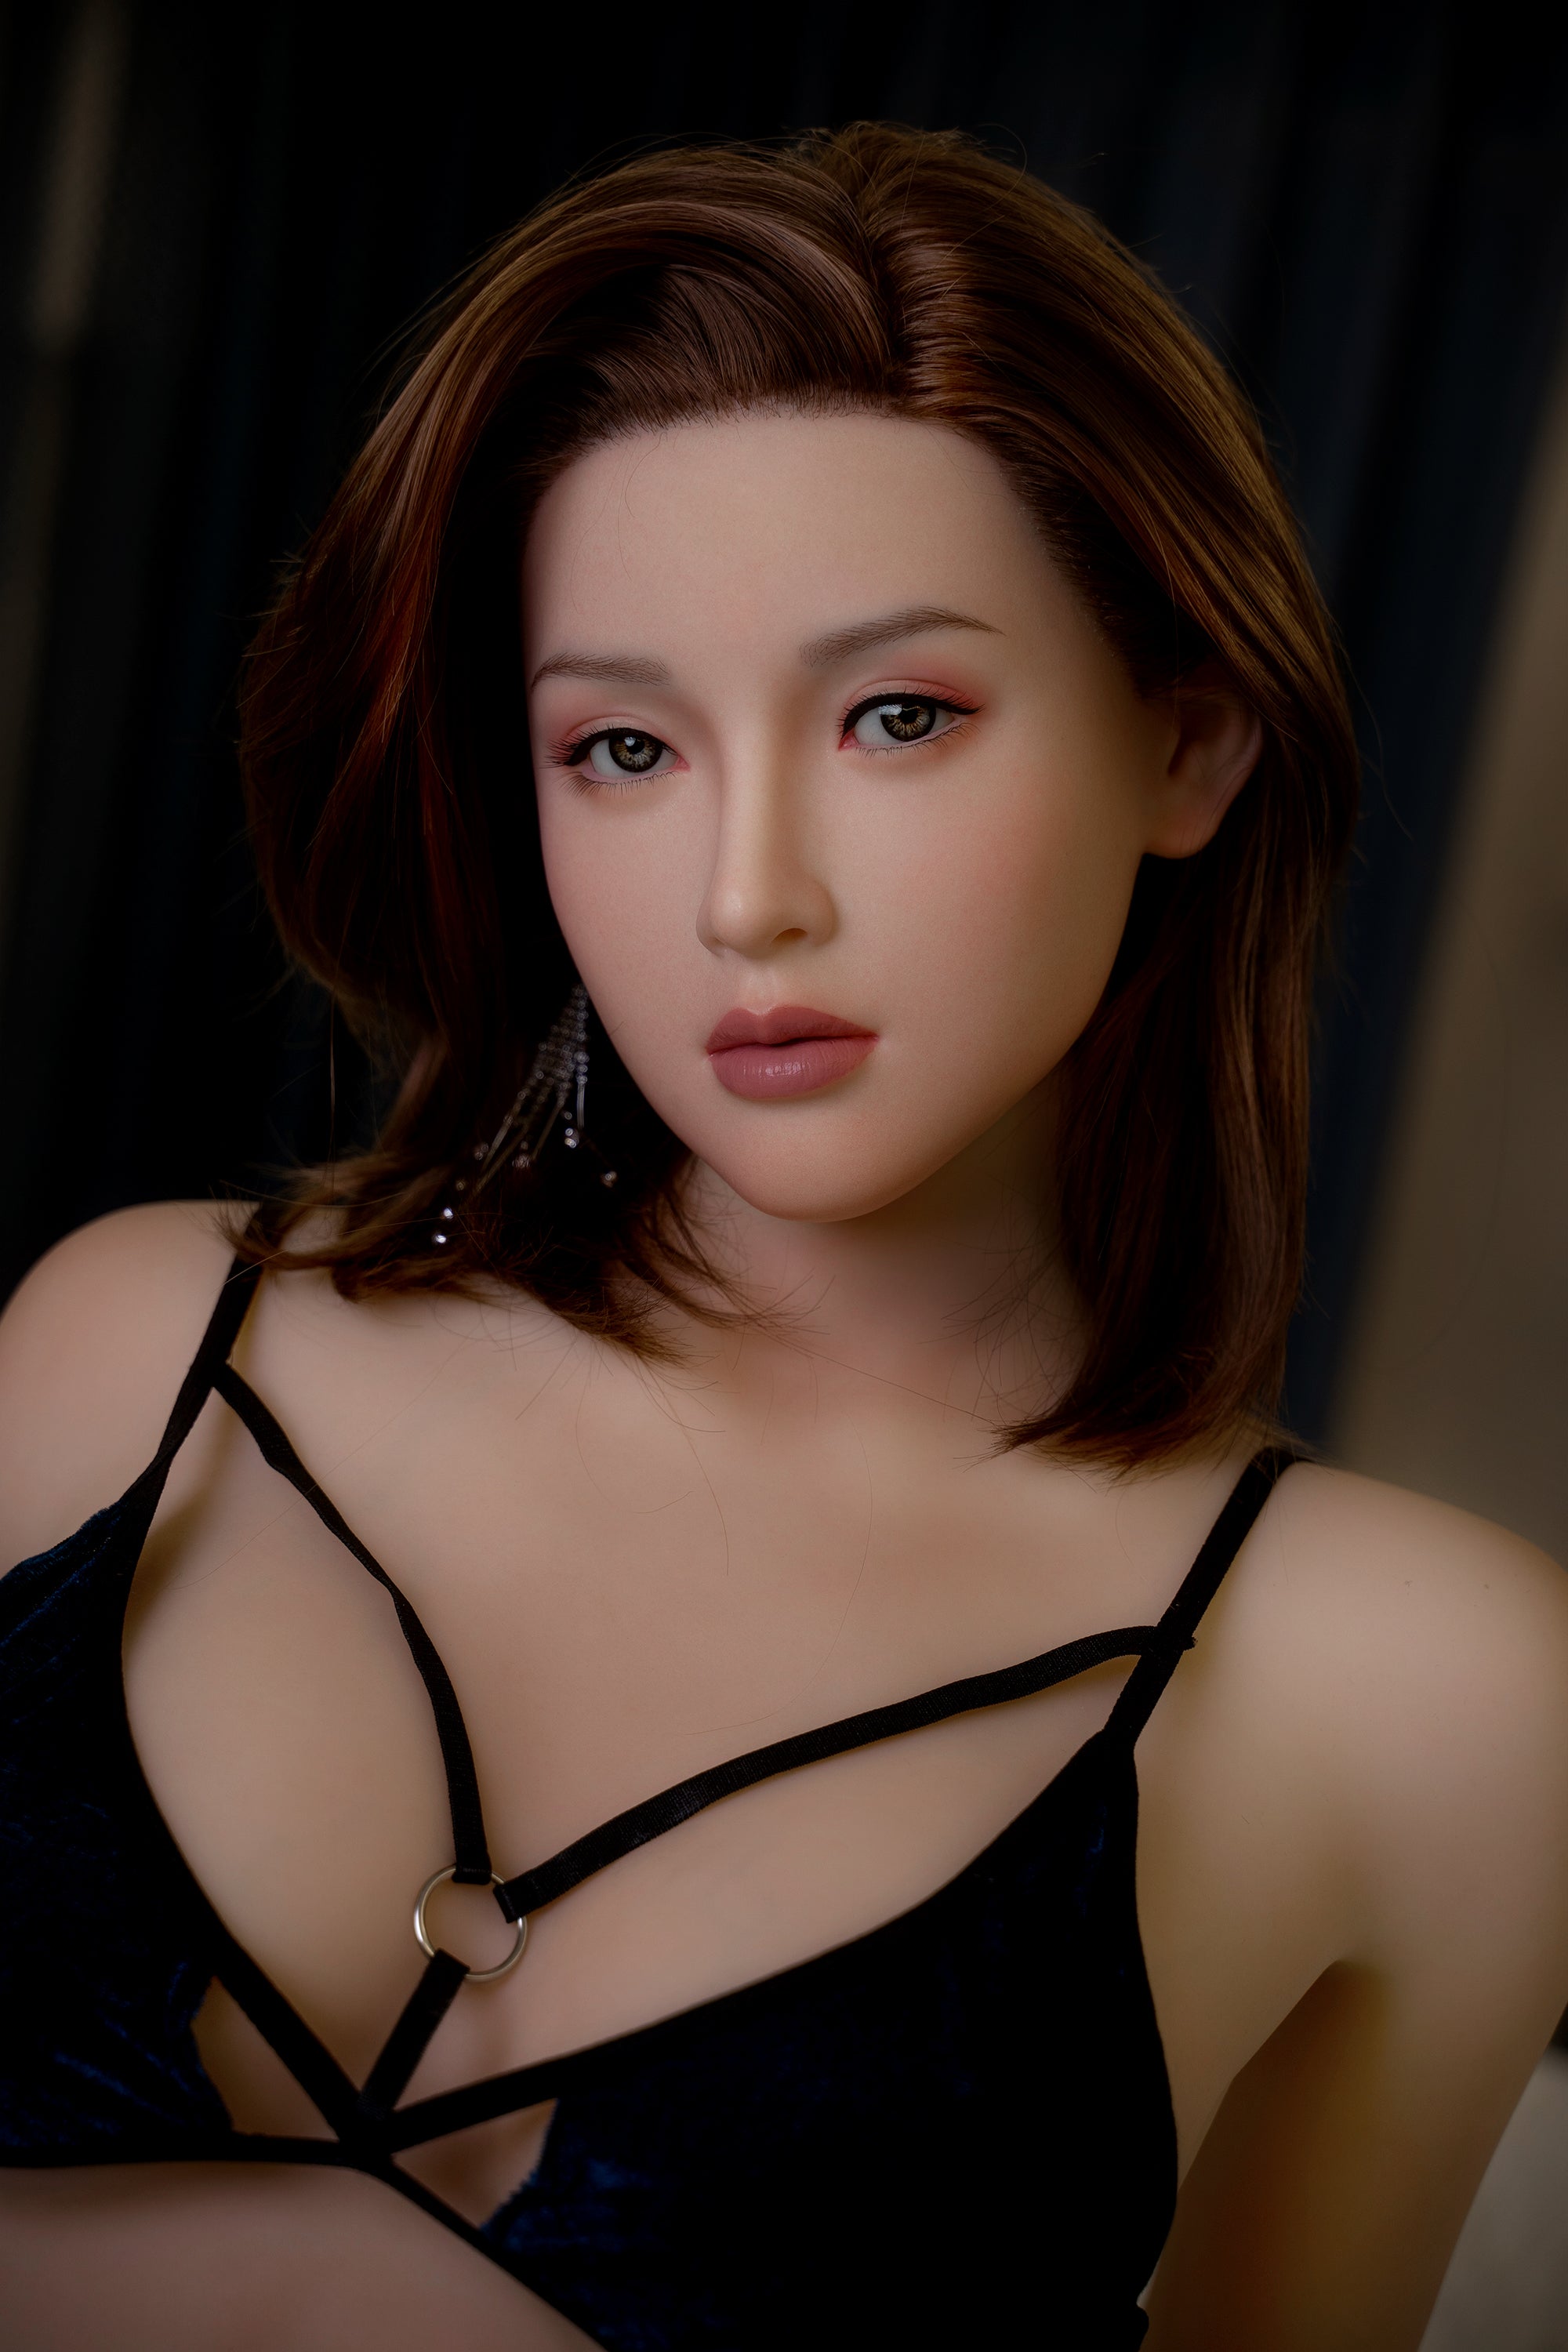 Zelex Doll 170 cm C Fusion - Seraphina | Buy Sex Dolls at DOLLS ACTUALLY